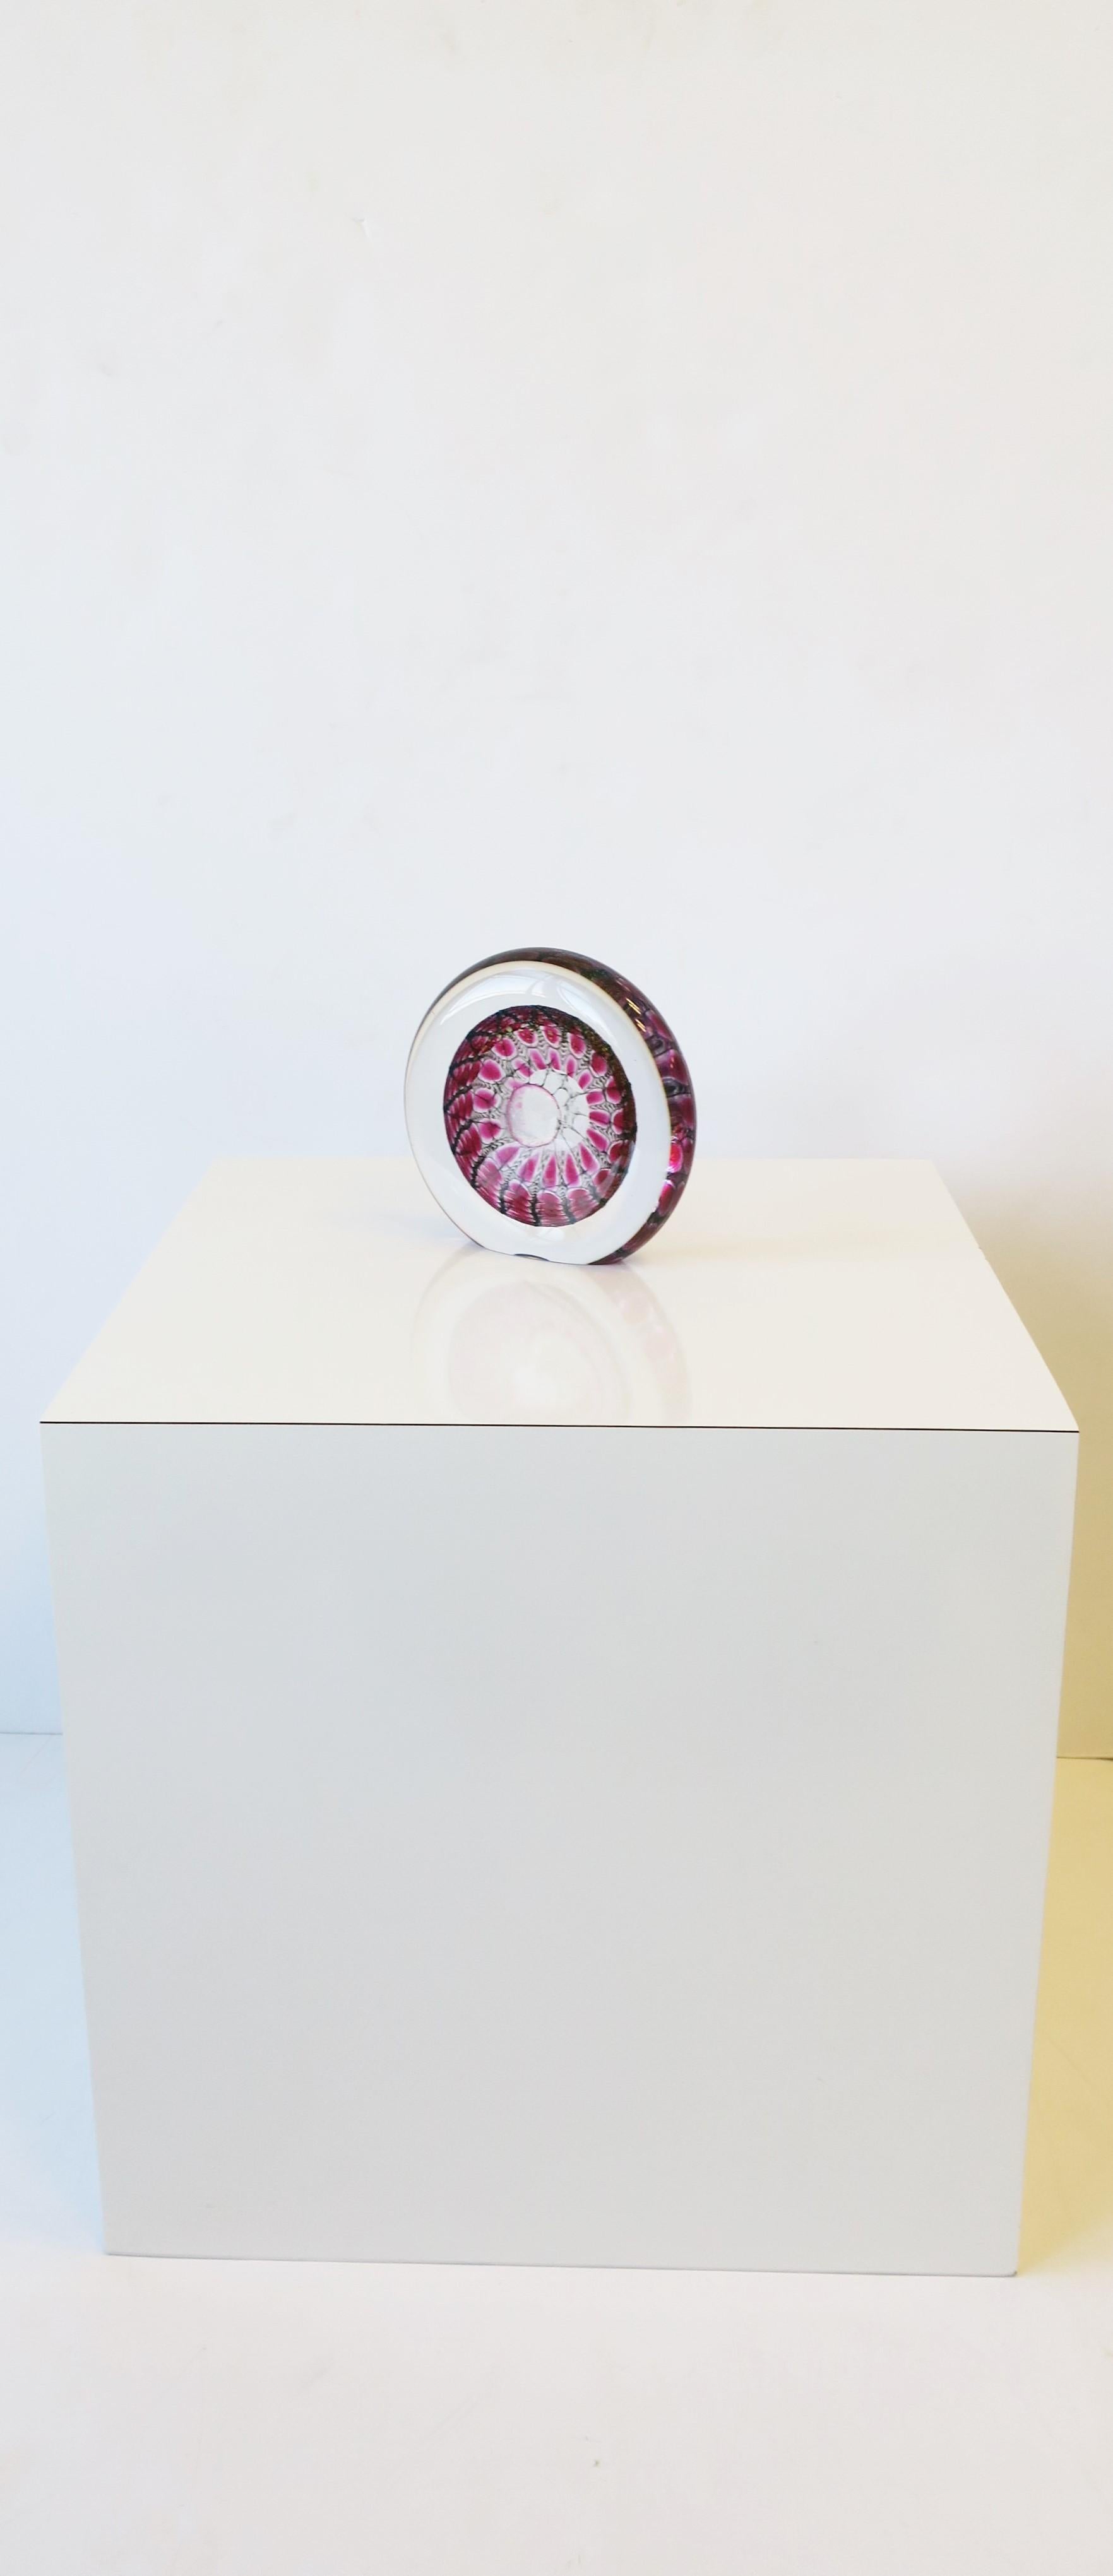 A beautiful and substantial round art glass decorative object, Contemporary period, 2011. Piece is signed and dated by artist on lower back area (please see image #11.) Art glass is transparent/clear with magenta pink/red raspberry and charcoal